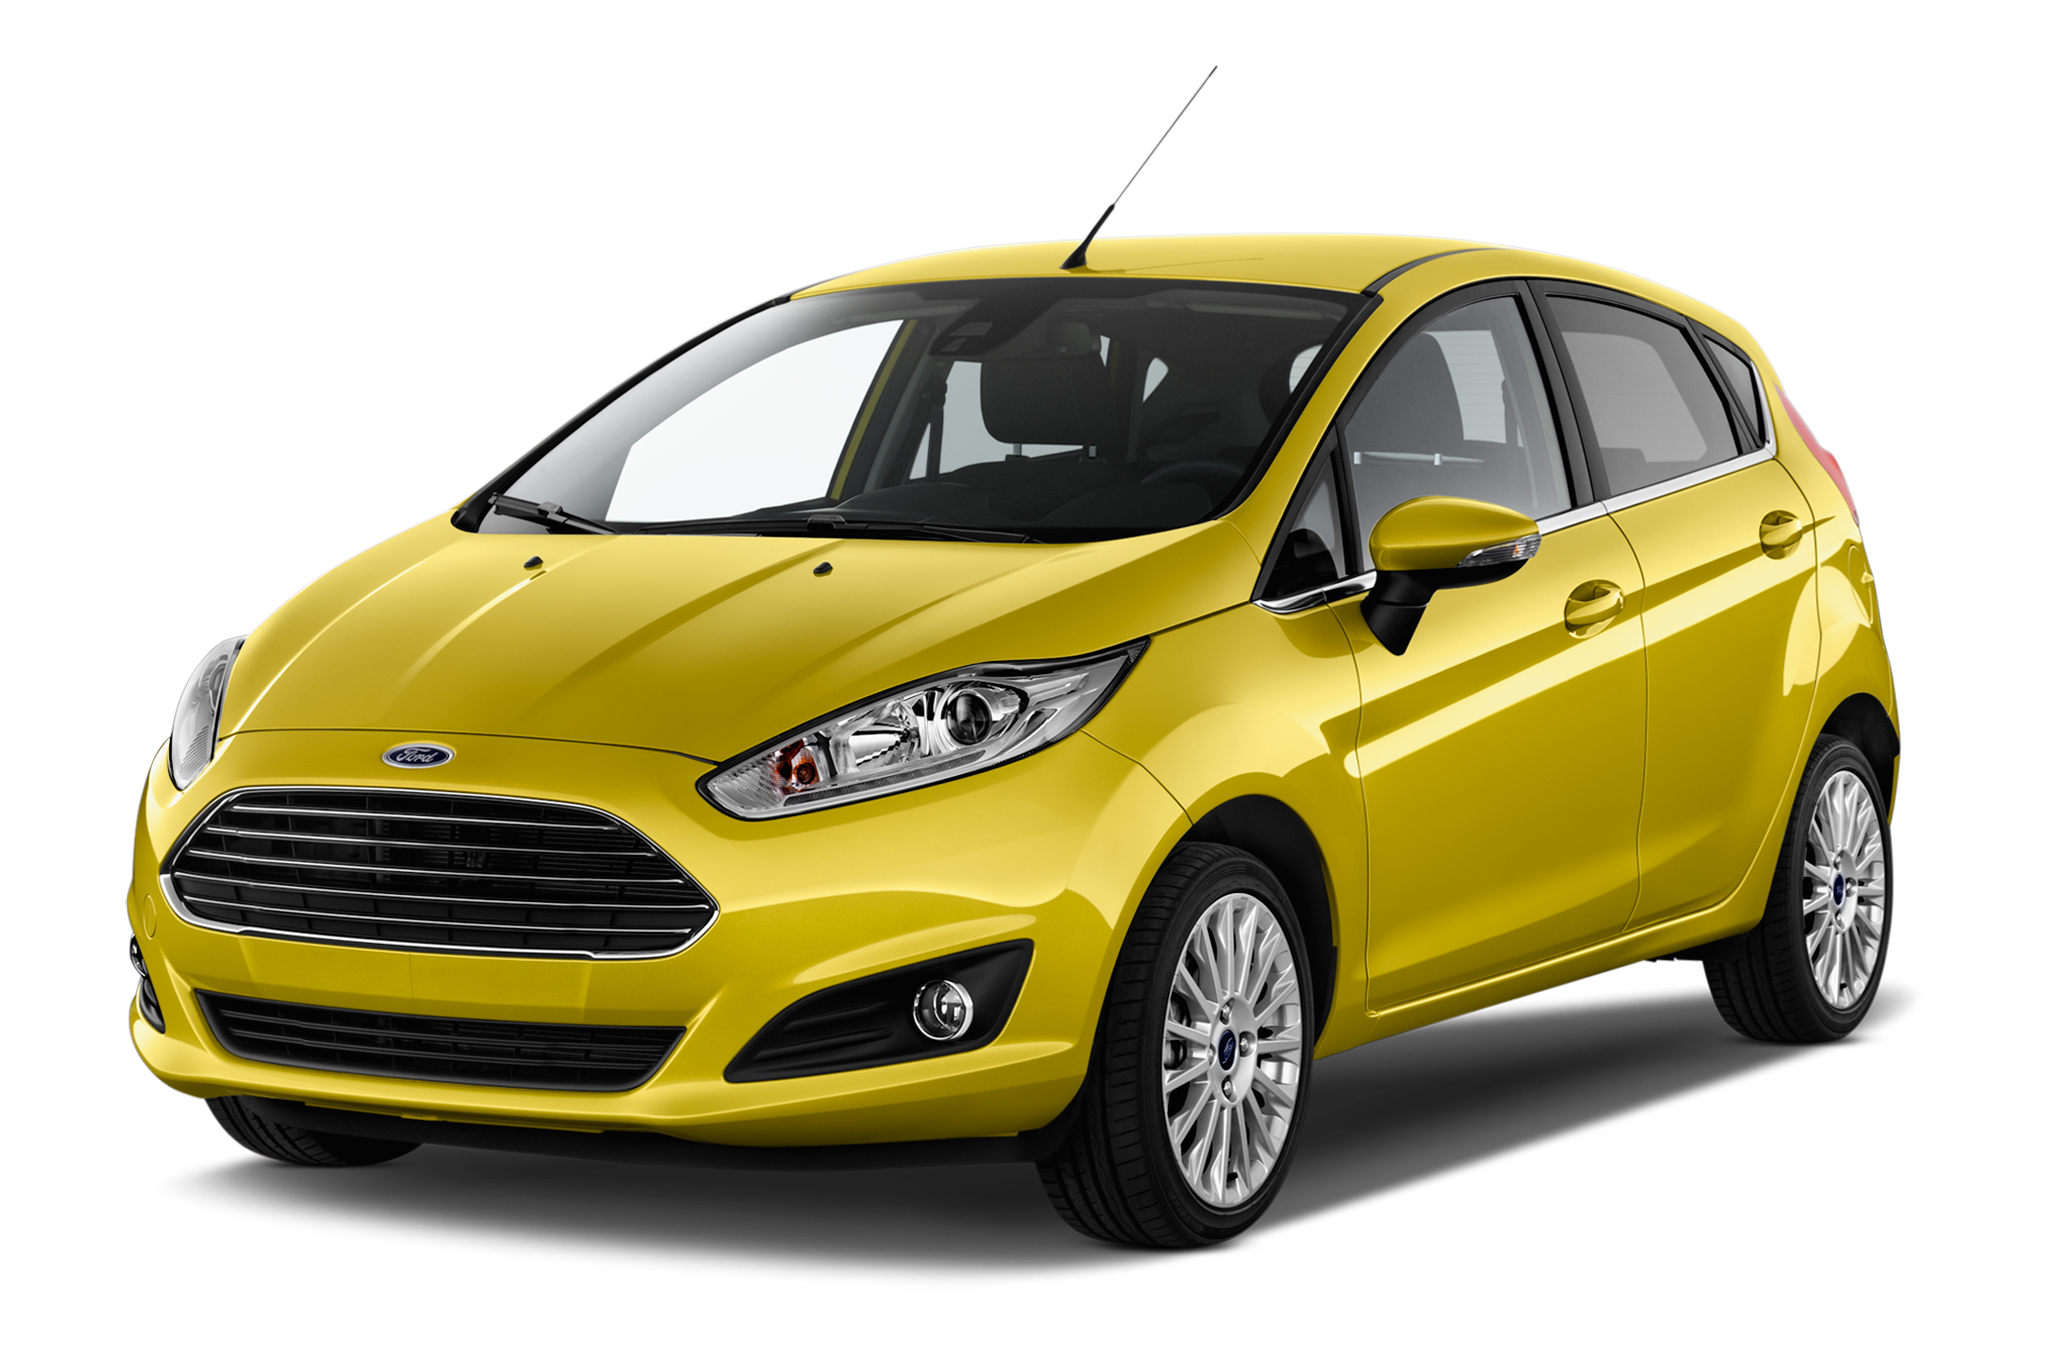 Ford PNG Image